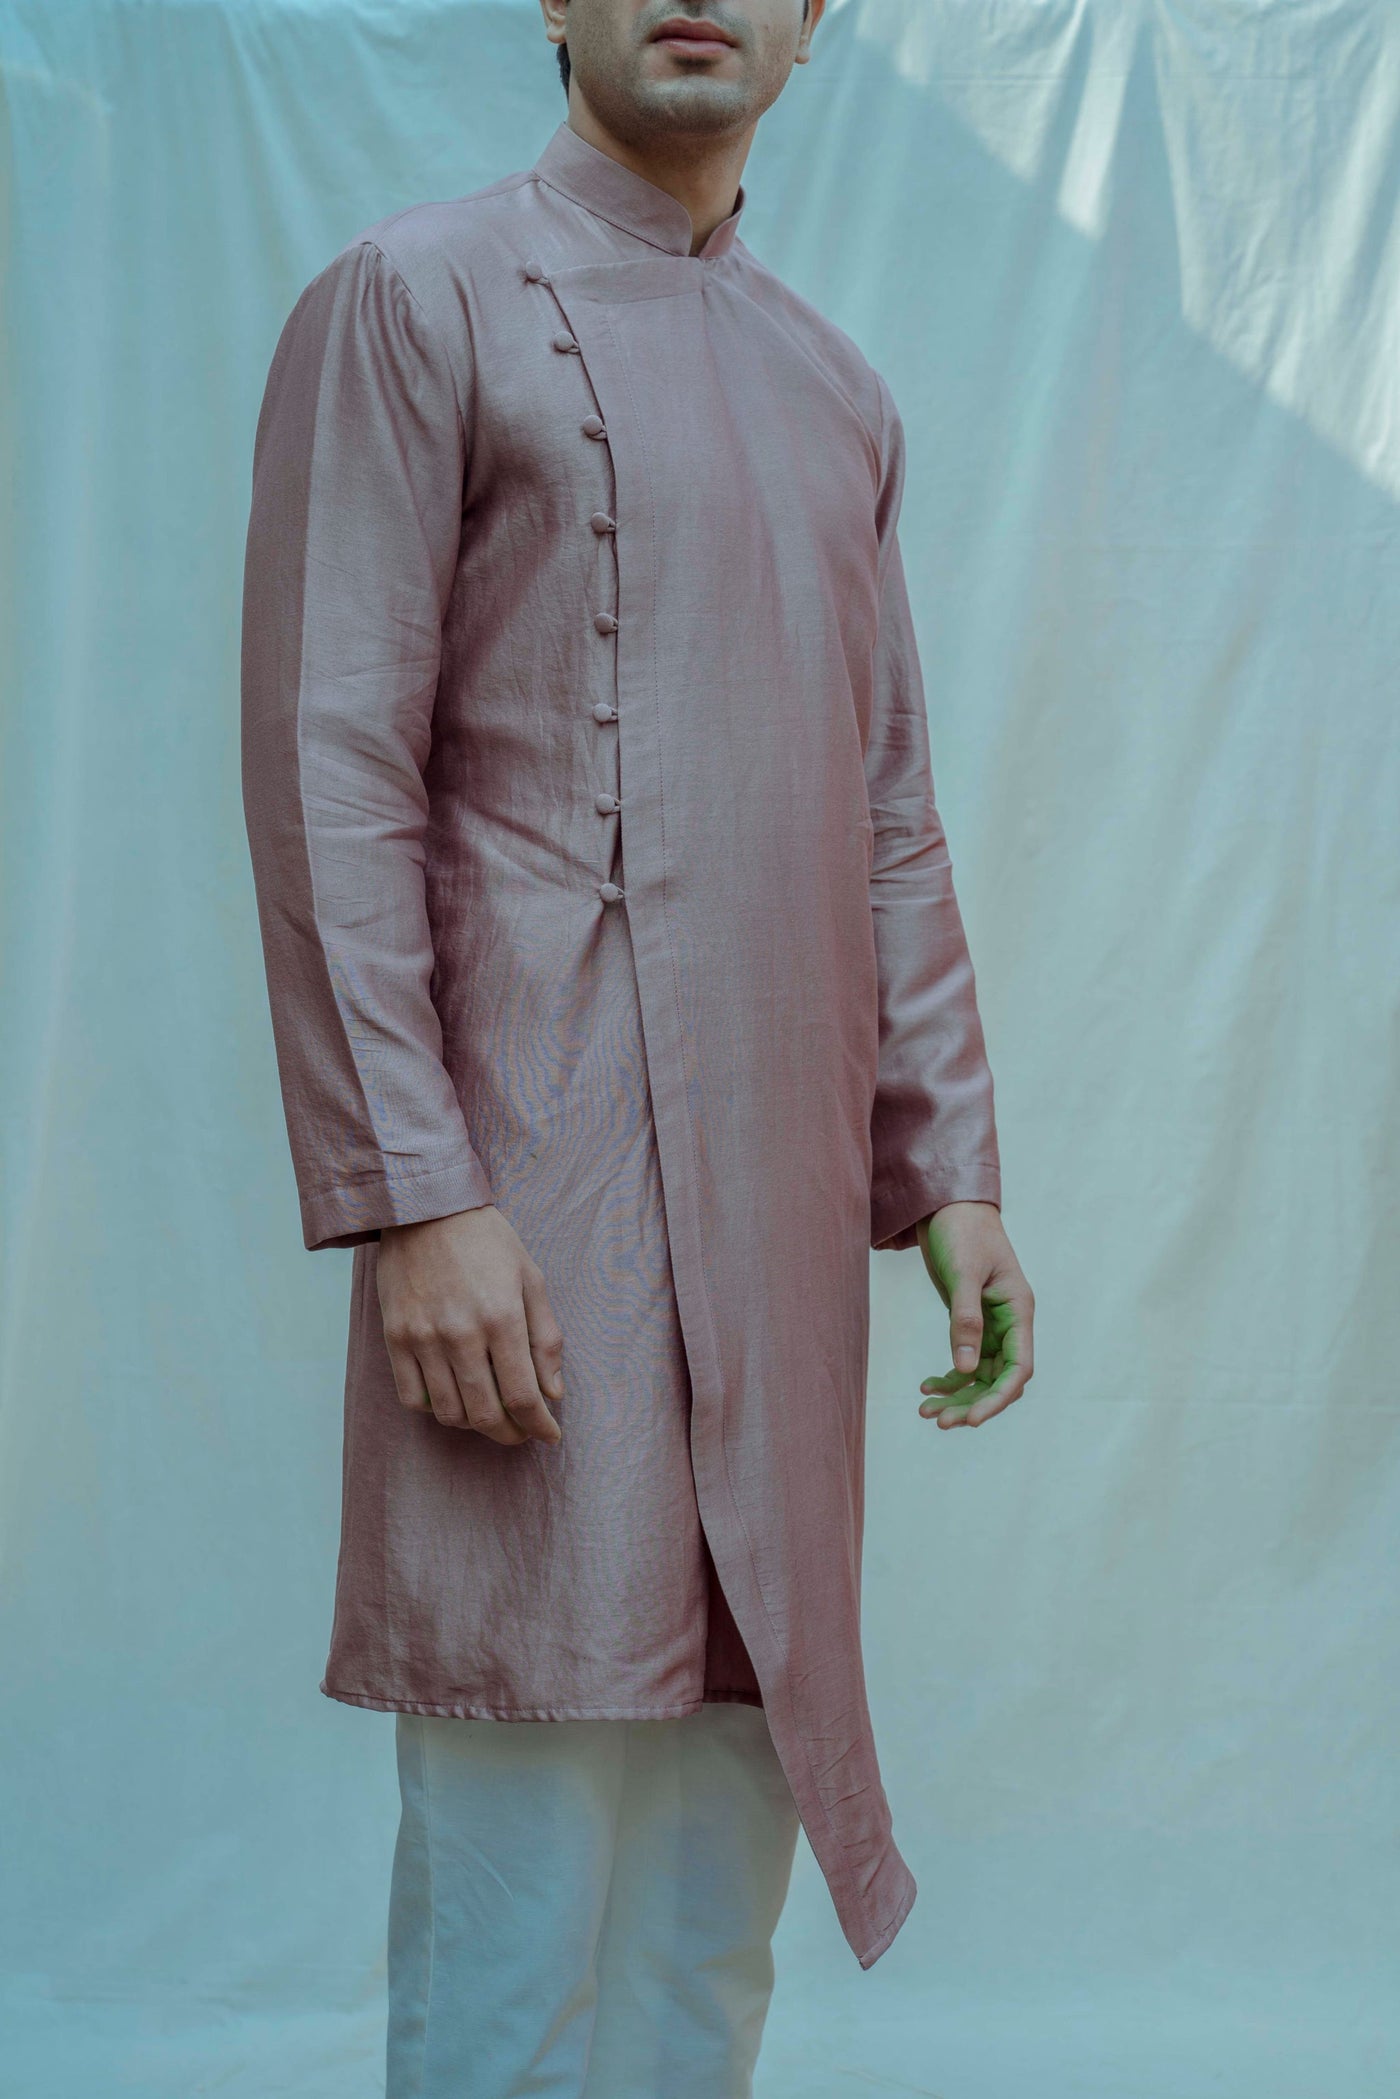 Mauve Kurta Set Indian Clothing in Denver, CO, Aurora, CO, Boulder, CO, Fort Collins, CO, Colorado Springs, CO, Parker, CO, Highlands Ranch, CO, Cherry Creek, CO, Centennial, CO, and Longmont, CO. NATIONWIDE SHIPPING USA- India Fashion X